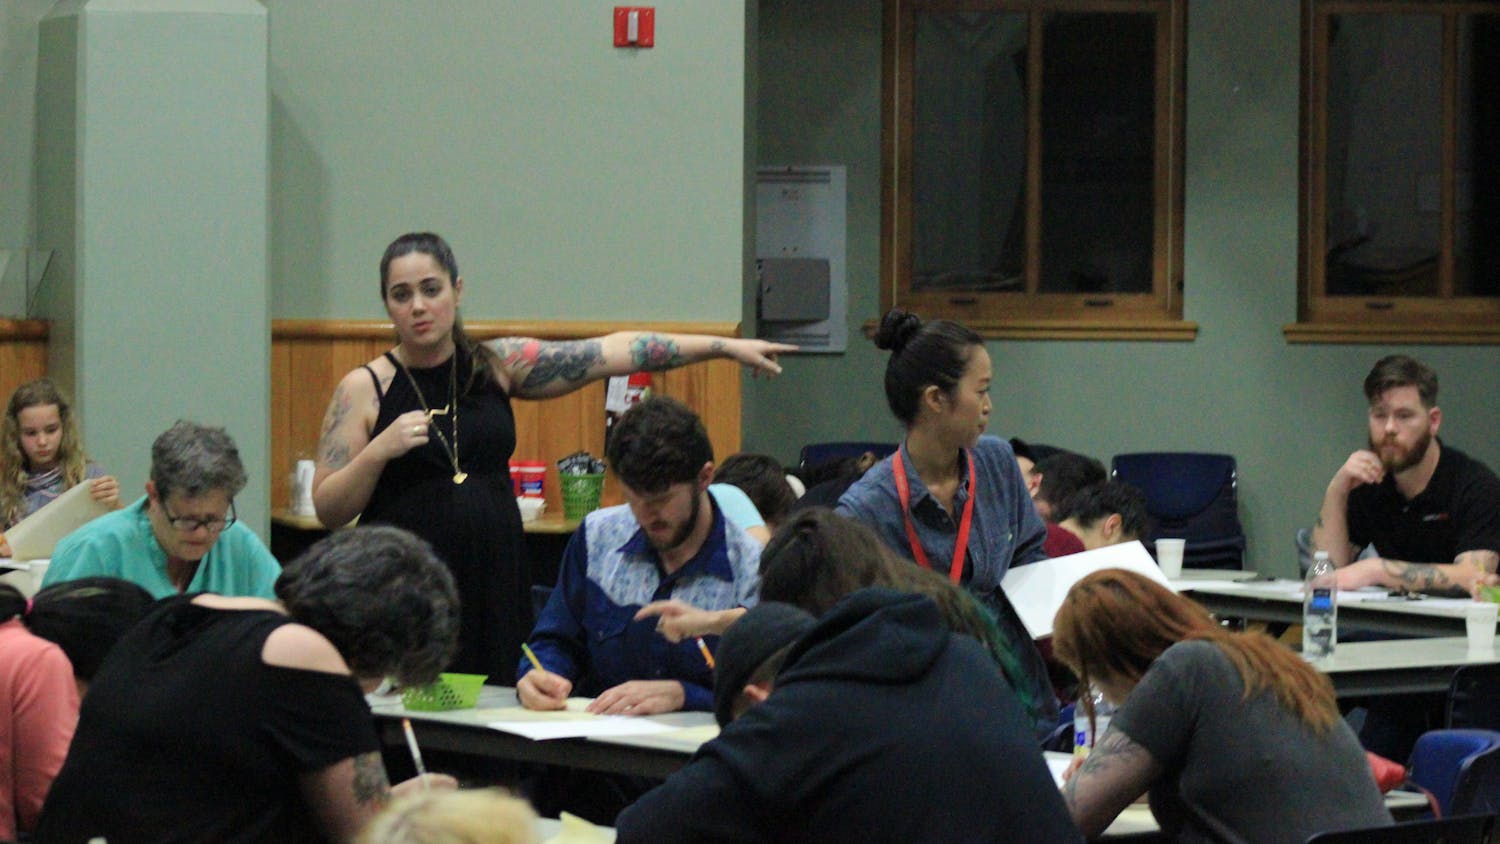 Standing to the left, Kristyn "Bat" Lopez, a tattooist for Death or Glory Tattoo, directs her Thursday night flash-tattoo workshop class at Alachua County Public Library's Headquarters Branch to drawing supplies.